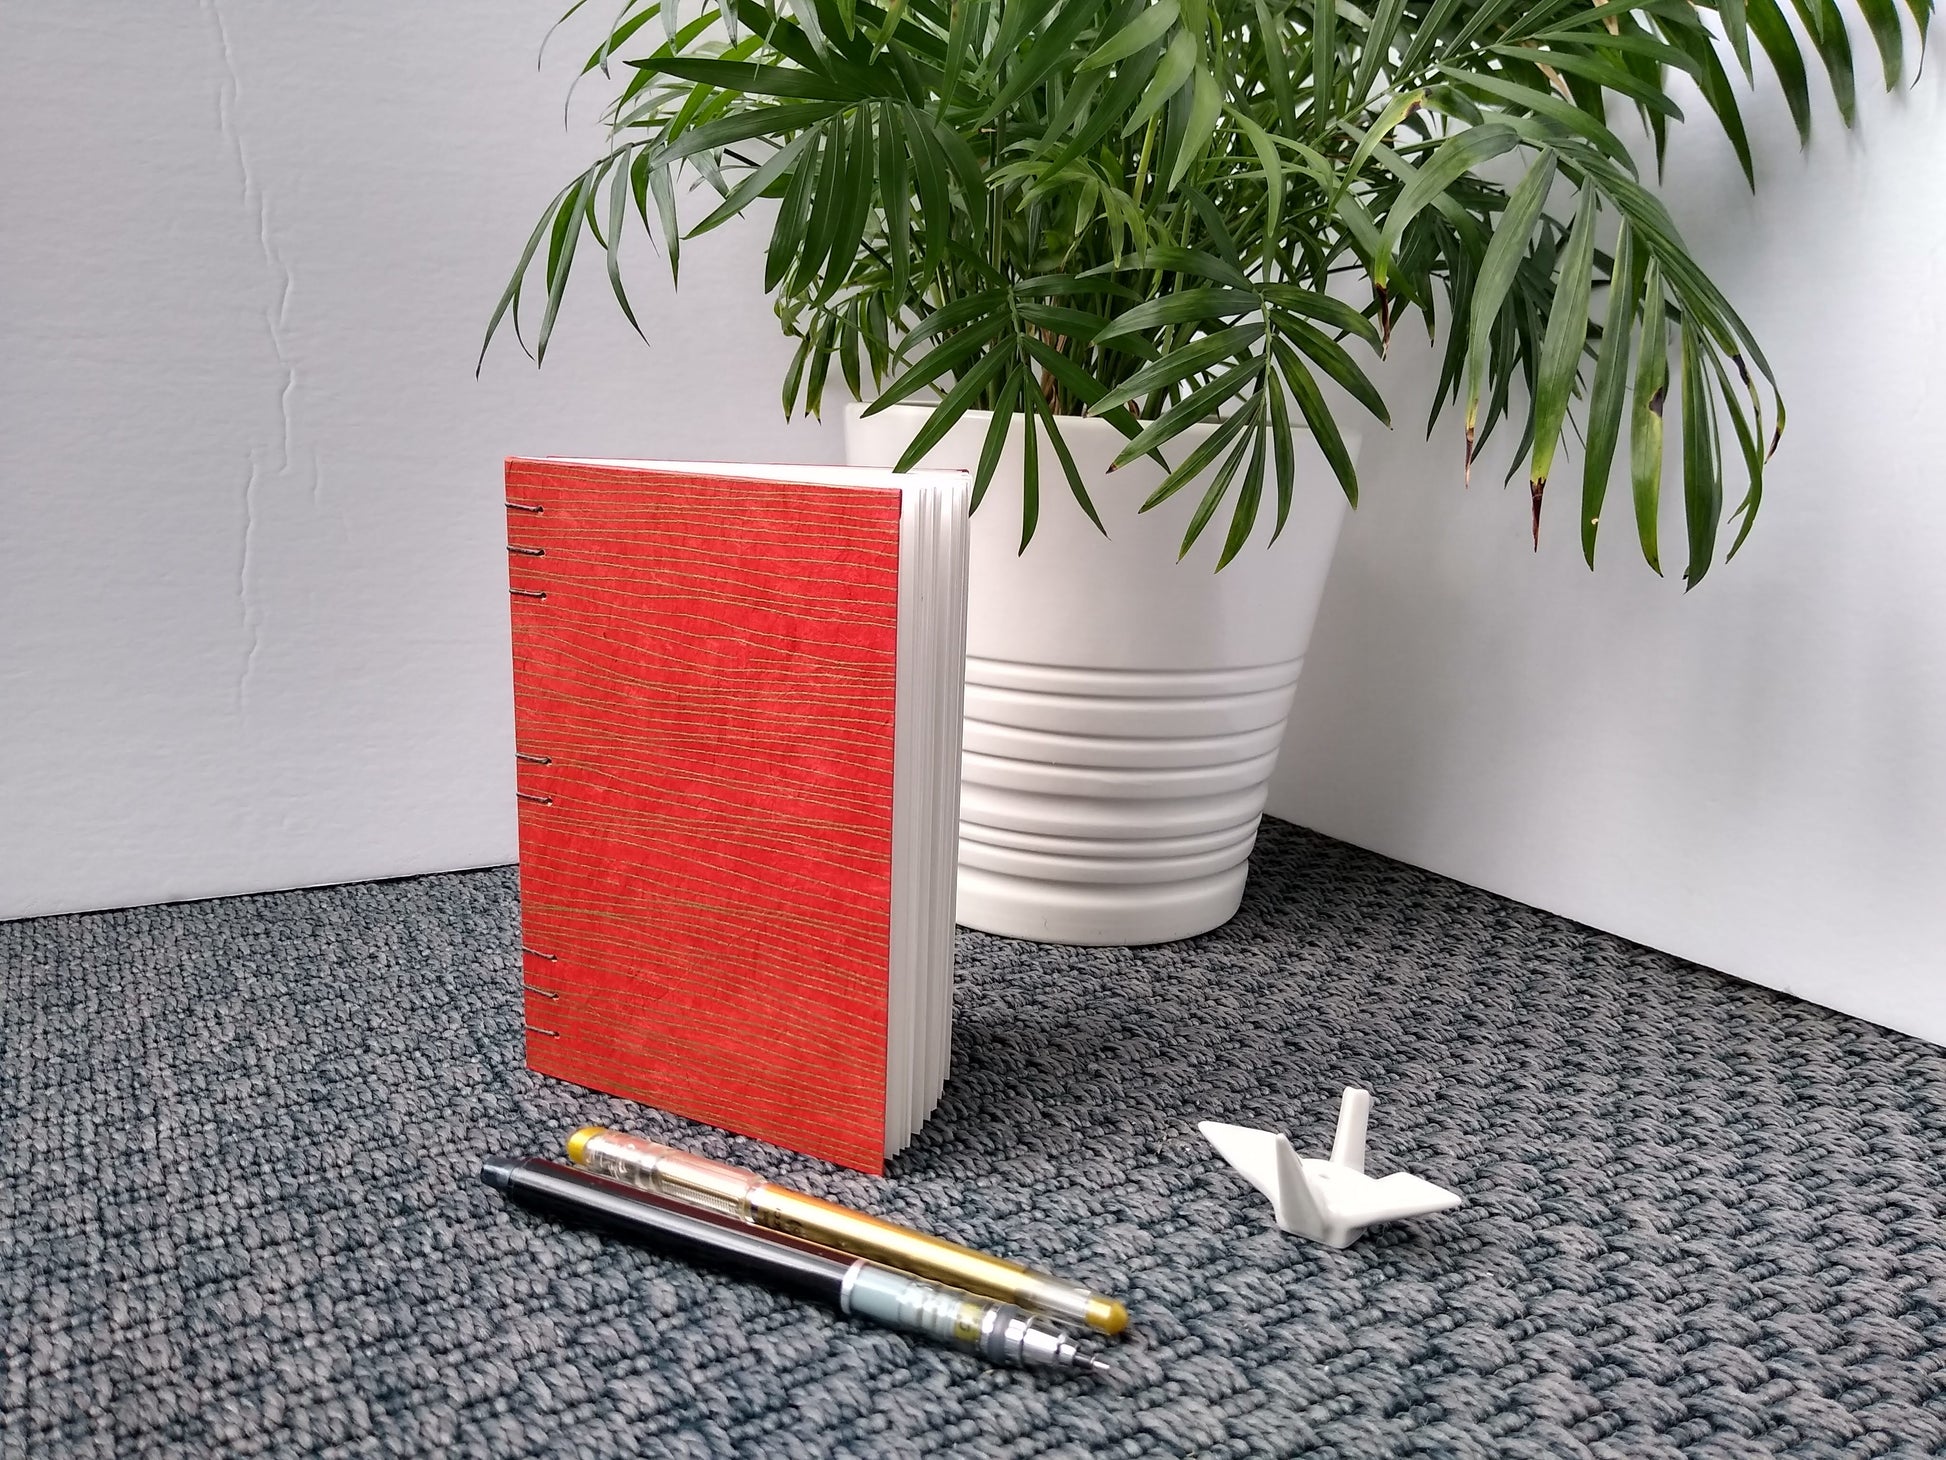 A handmade journal sits upright beside a potted plant, a ceramic crane, a gold pen, and a black mechanical pencil. The cover of the journal is red with wavy horizontal gold lines across it.